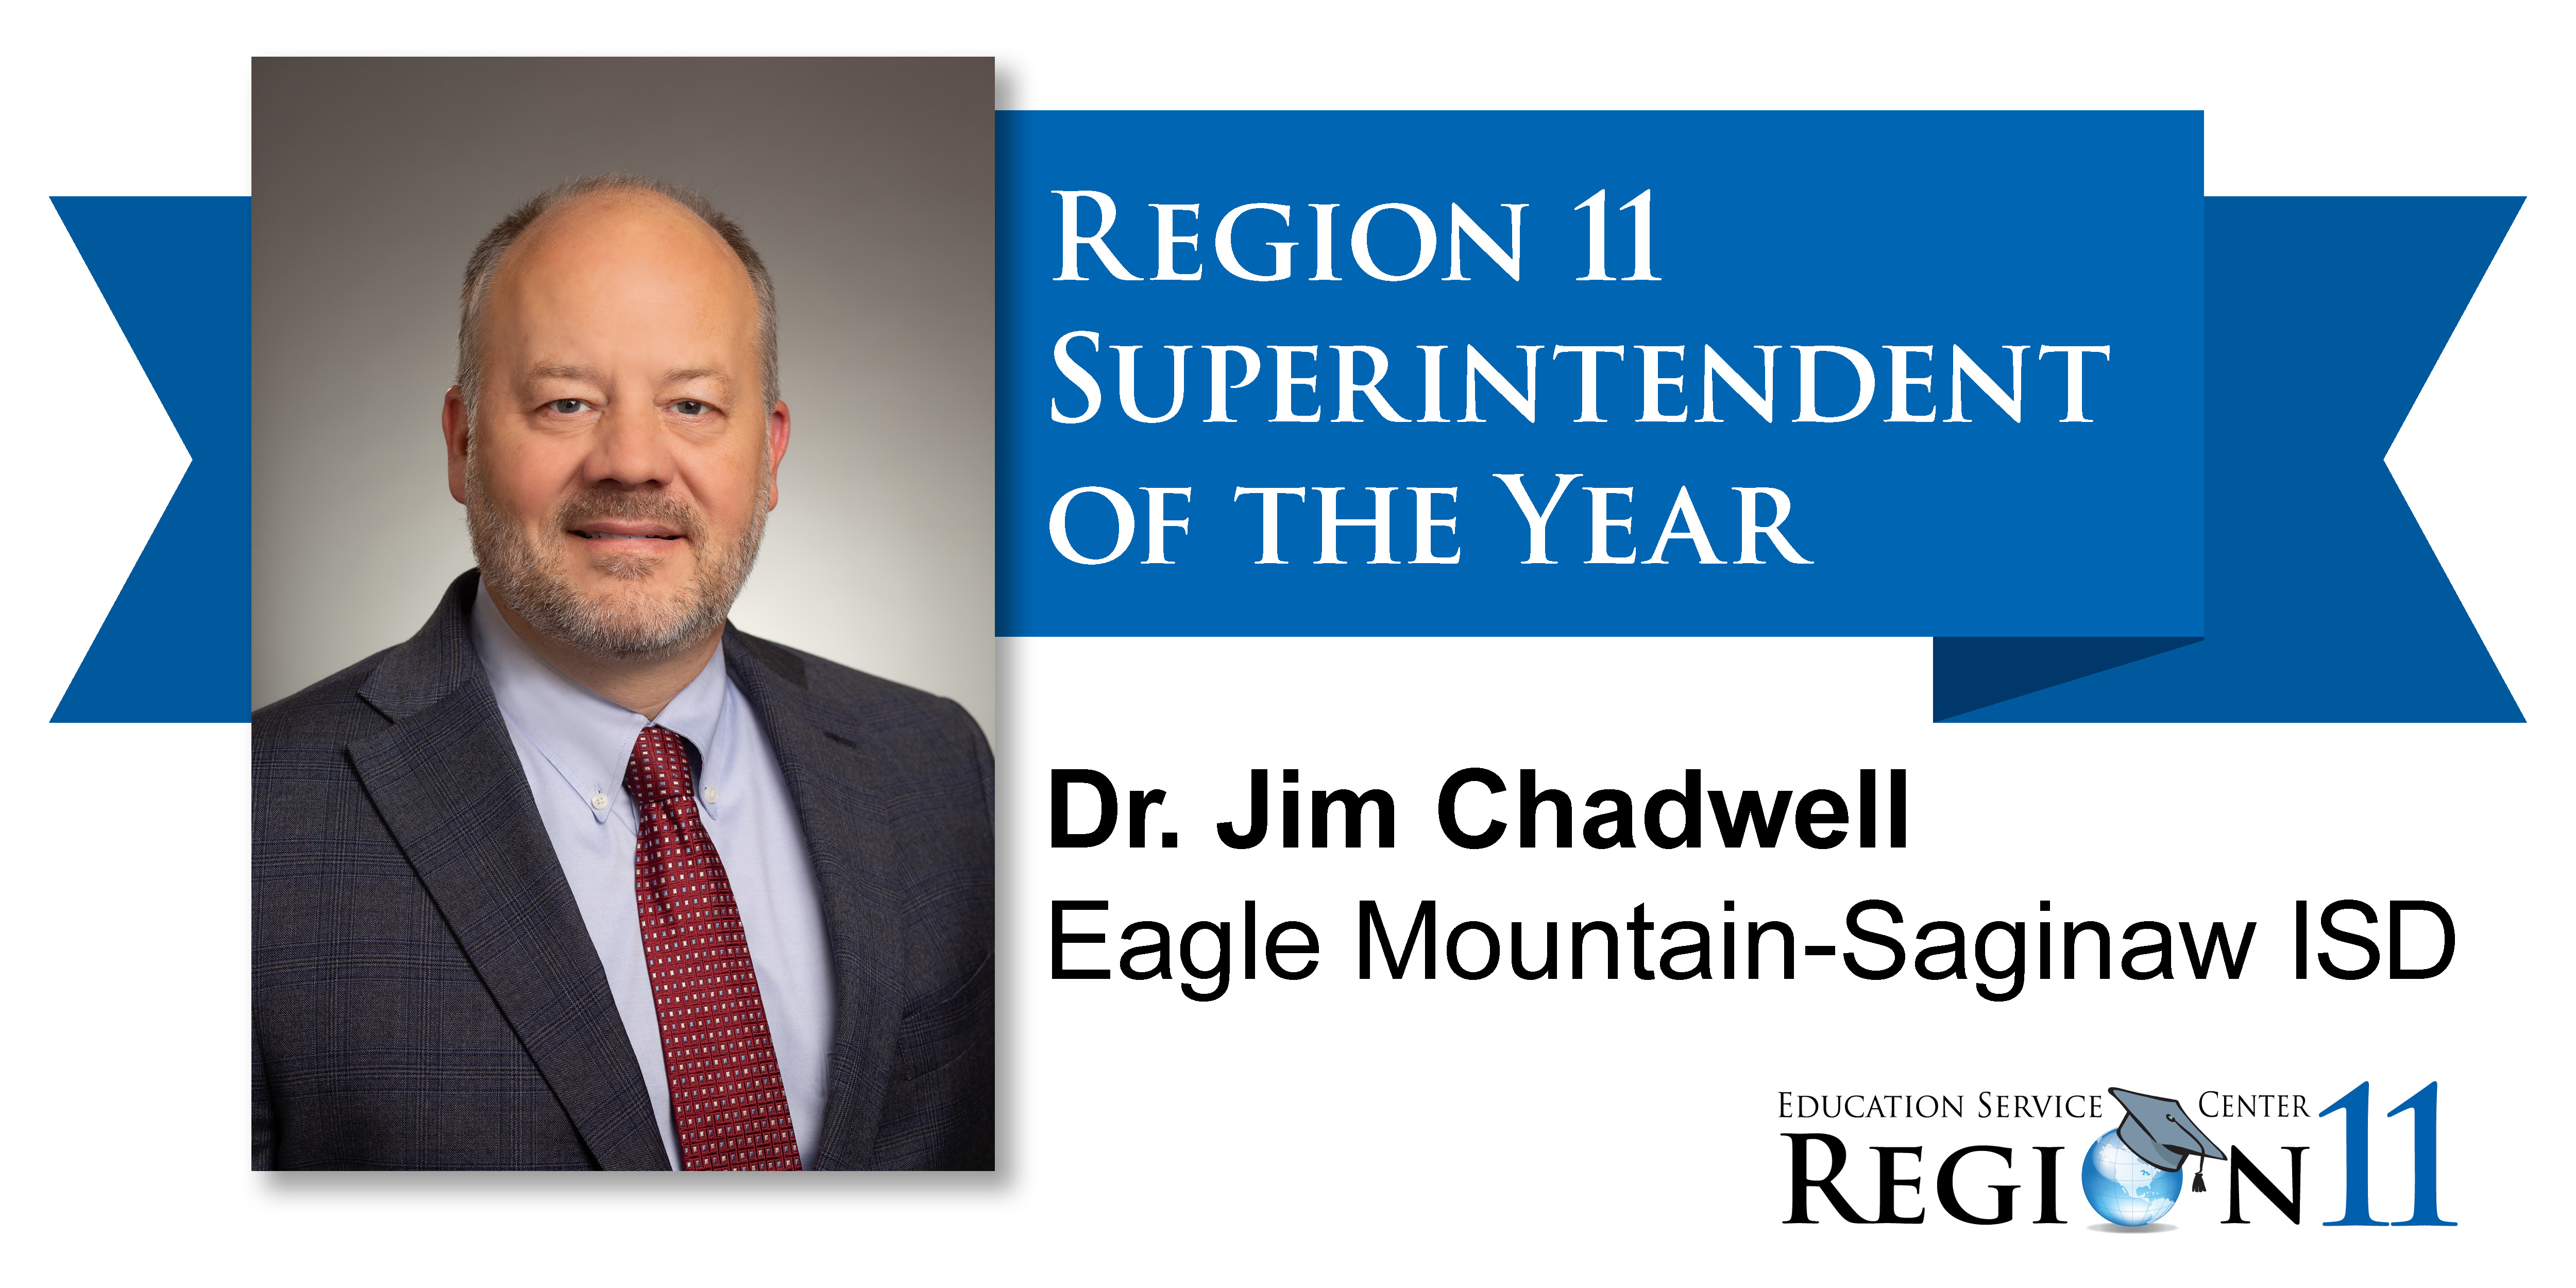 Region 11 Superintendent of the Year — Dr. Jim Chadwell 